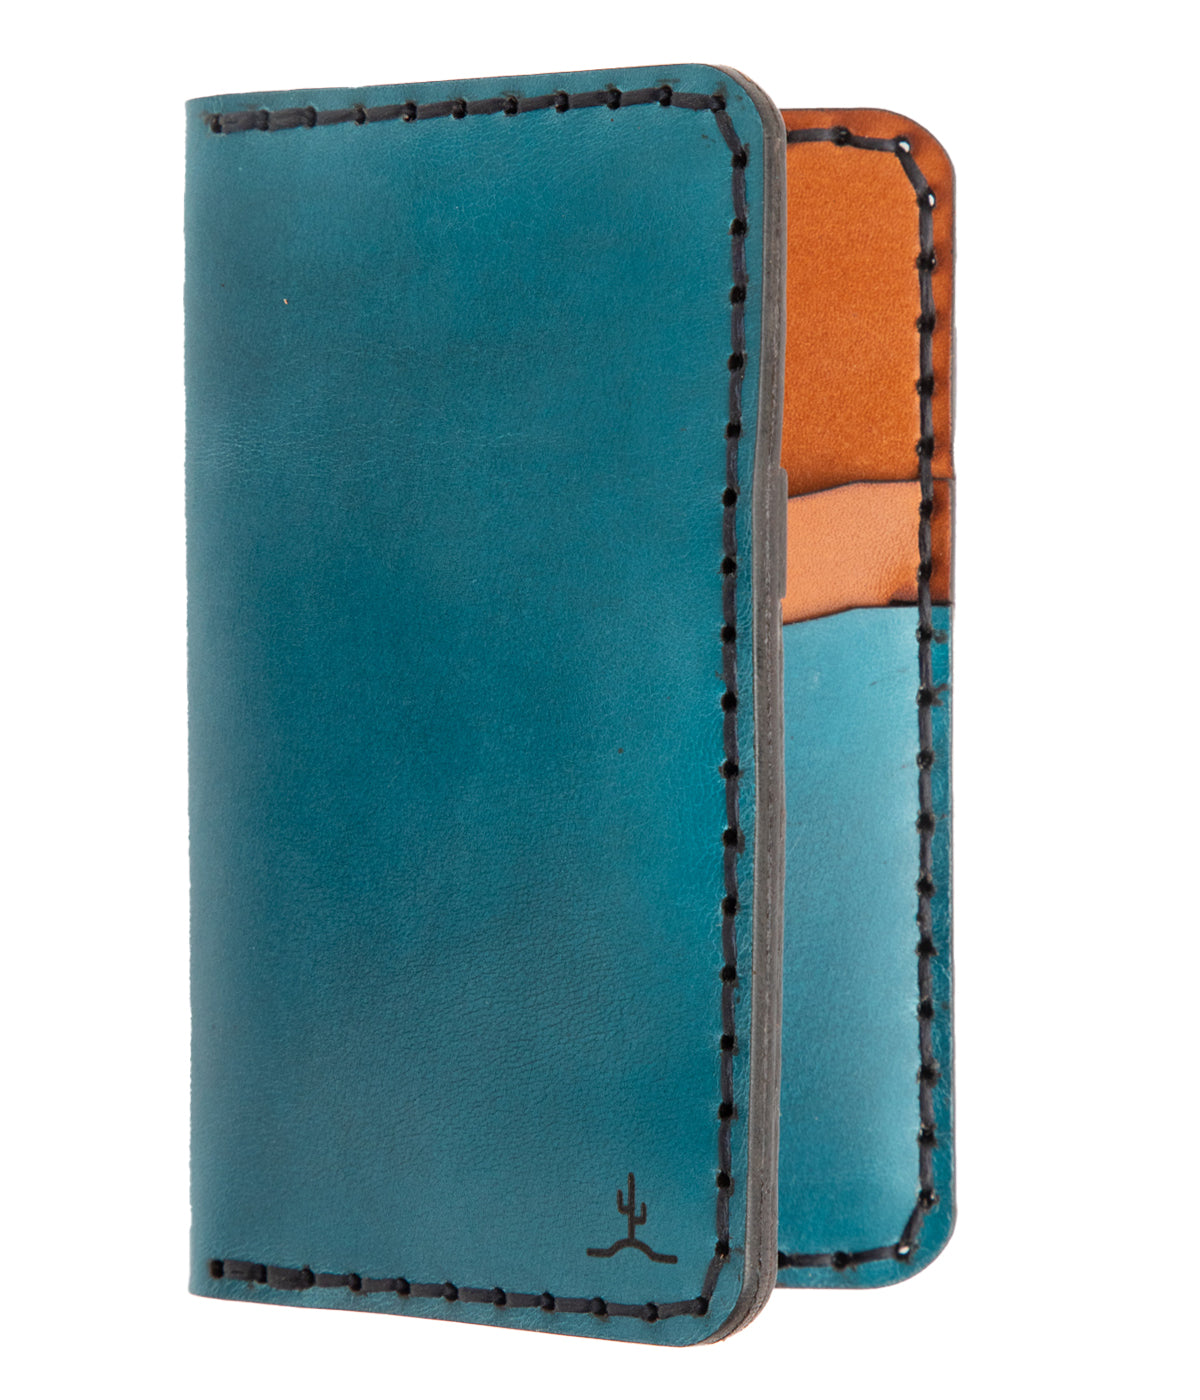 blue exterior and brown interior leather wallet with four card pockets